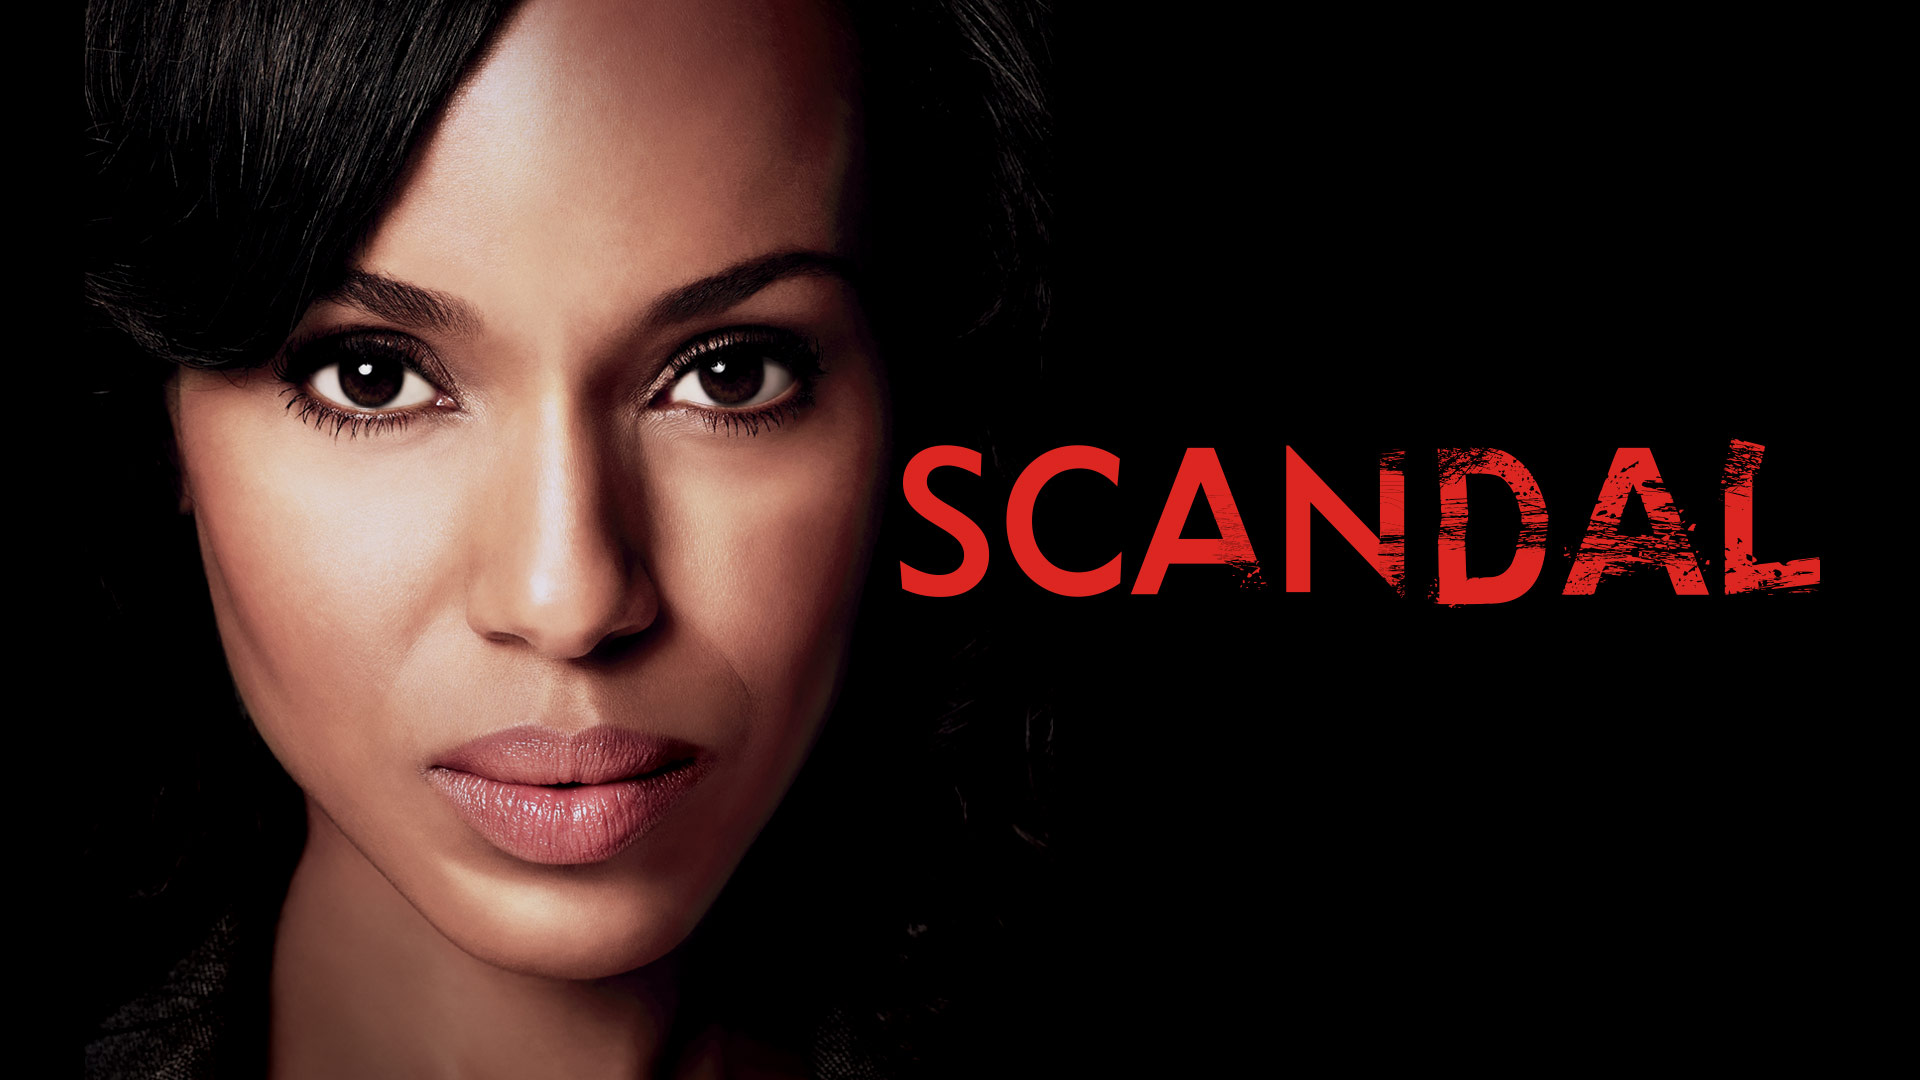 bj masters recommends Scandal Latest Episode Online